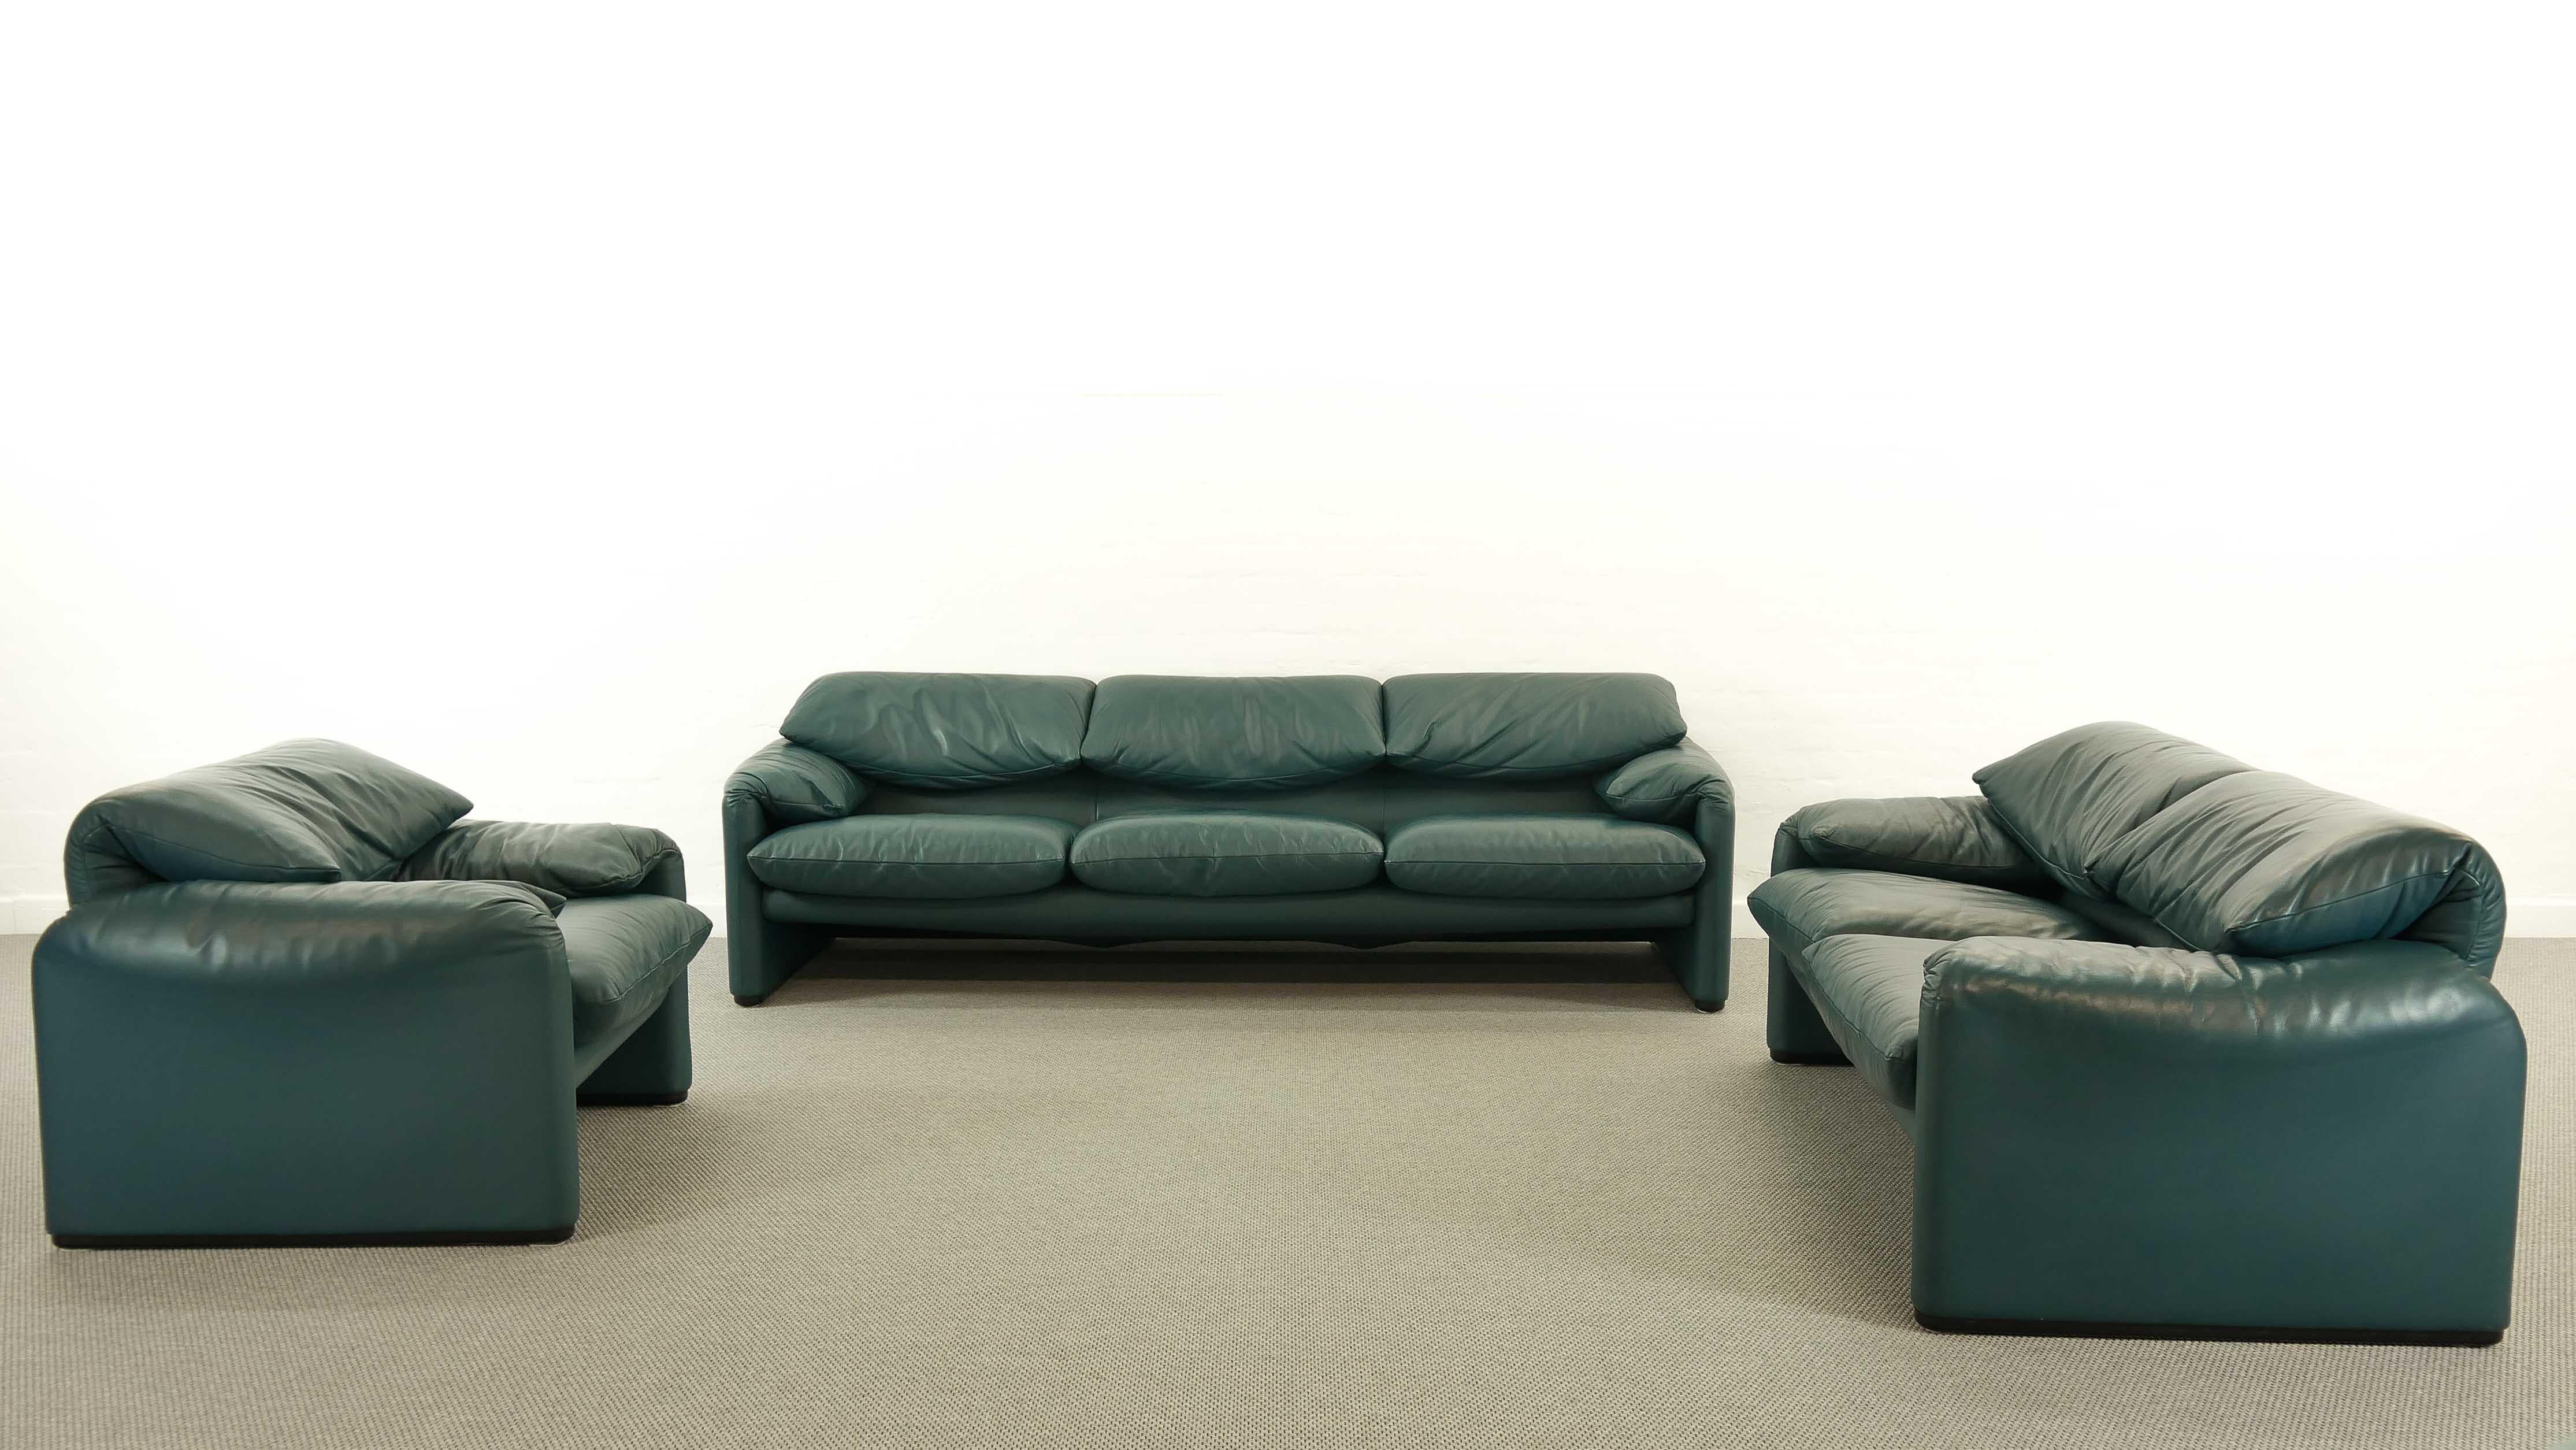 Set Cassina Maralunga 2-Seat Sofa and Easy Chair by Vico Magistretti in Leather 2